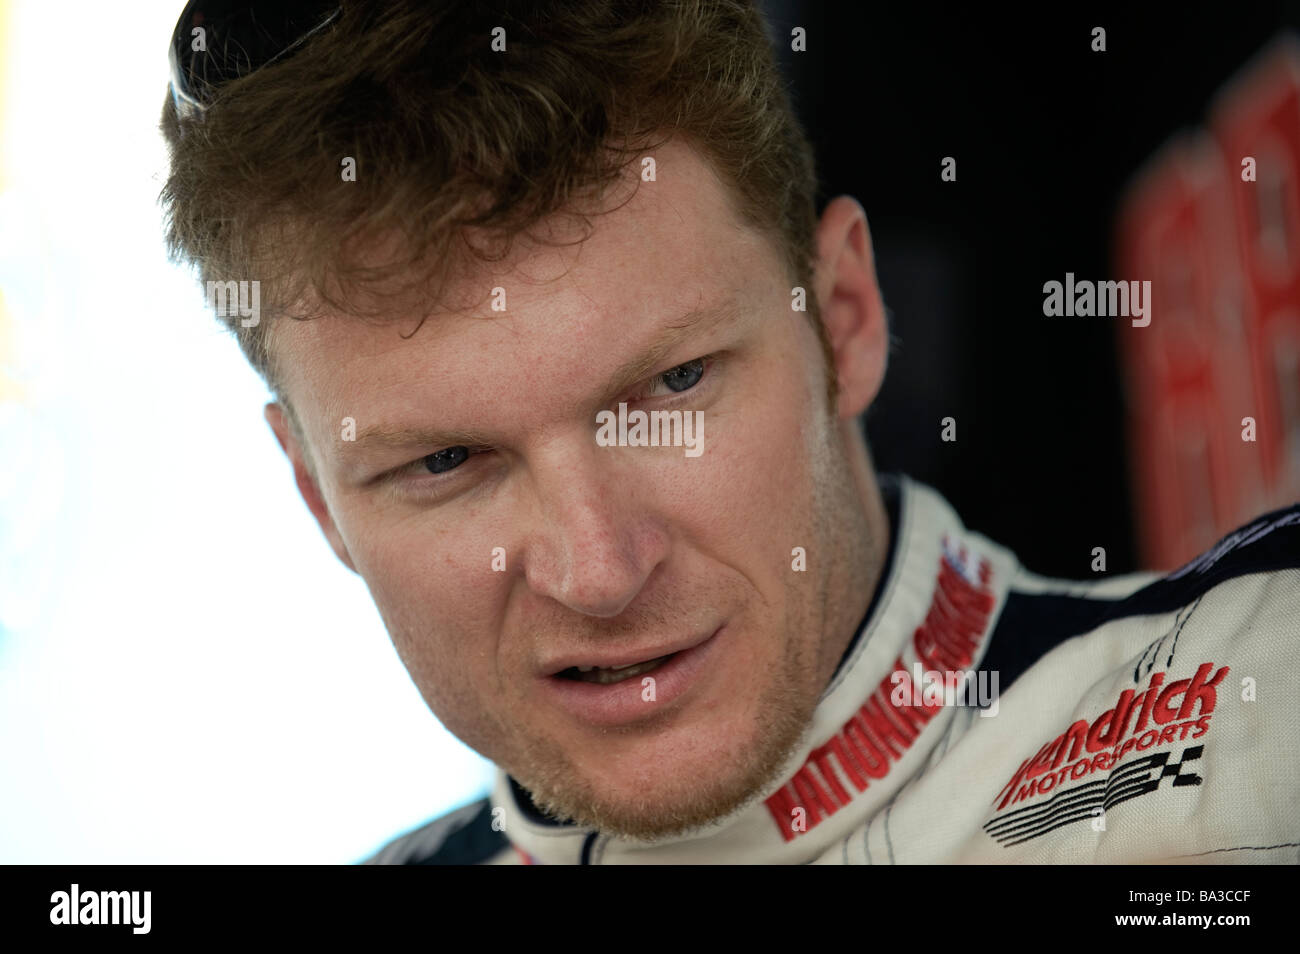 NASCAR driver Dale Earnhardt Jr at the 3M Performance 400 at Michigan International Speedway, 2008 Stock Photo